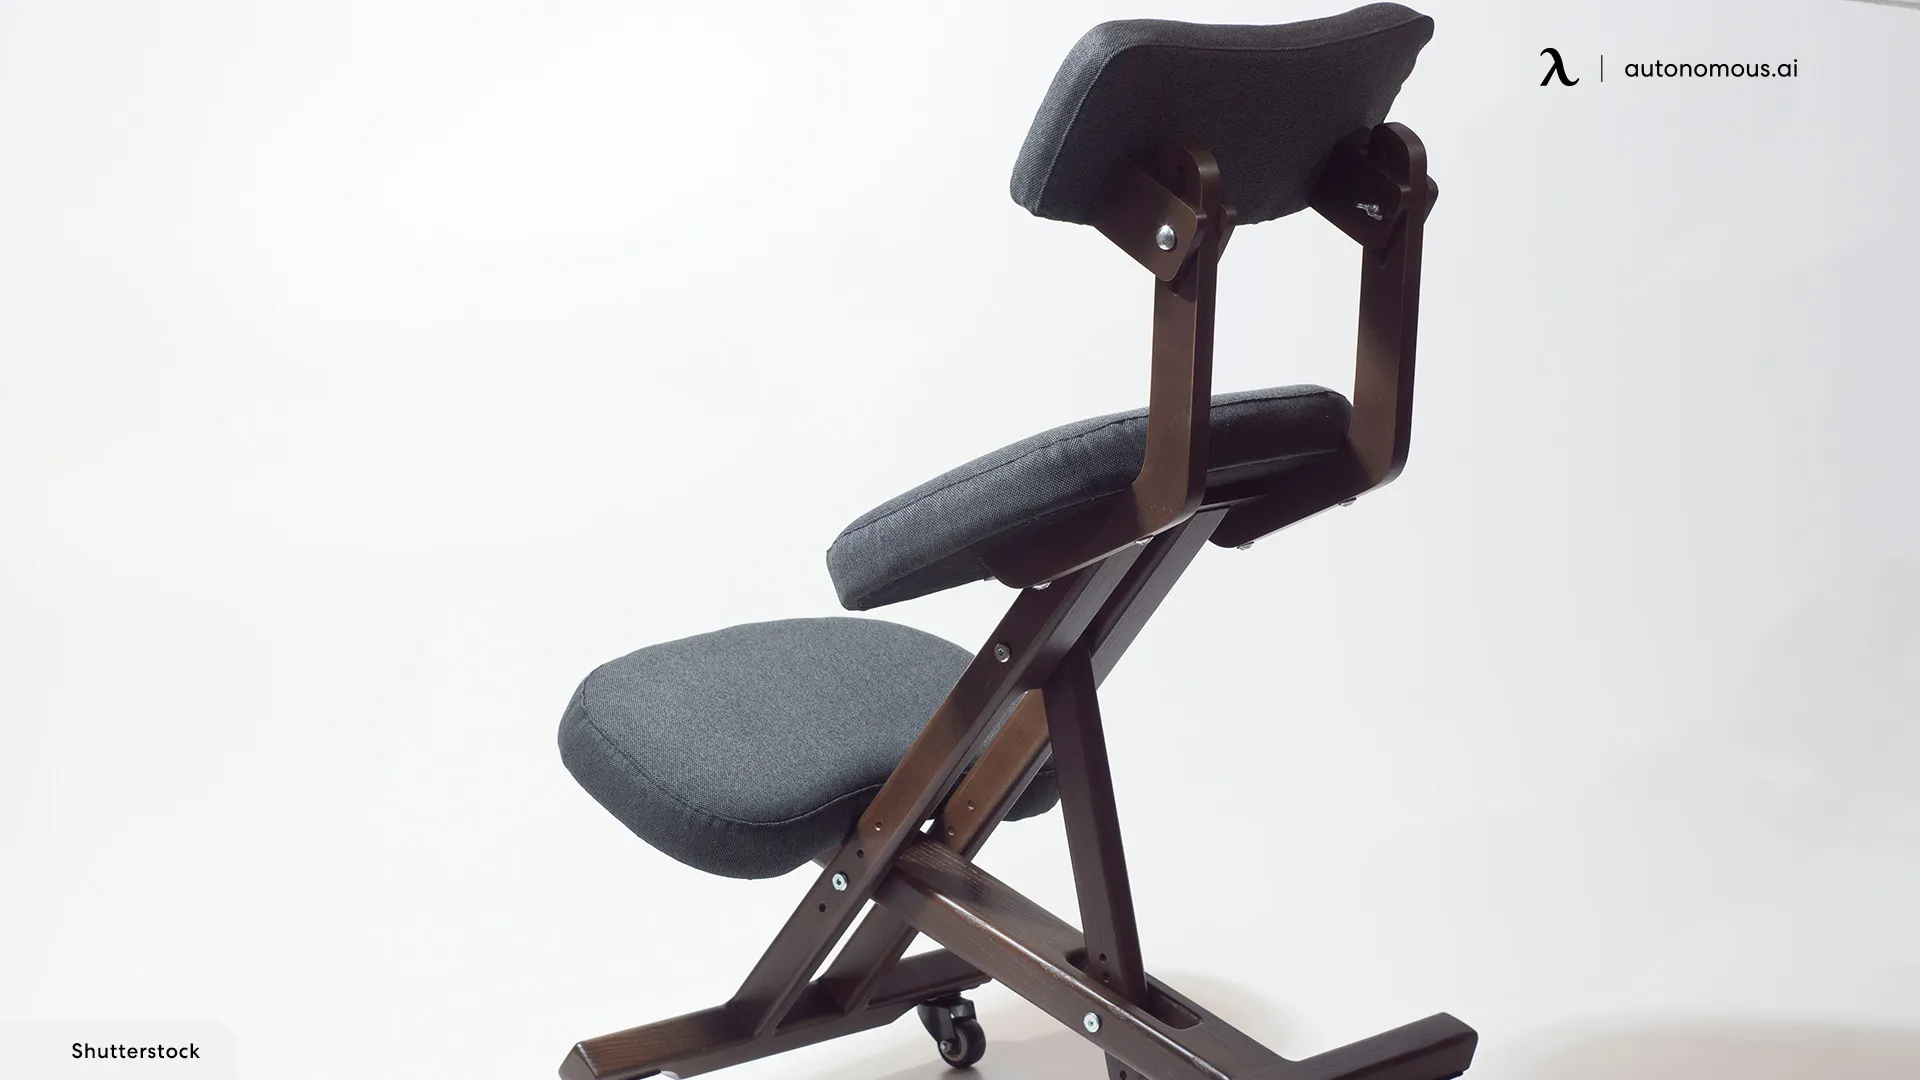 Factors to Consider When Choosing a Kneeling Chair